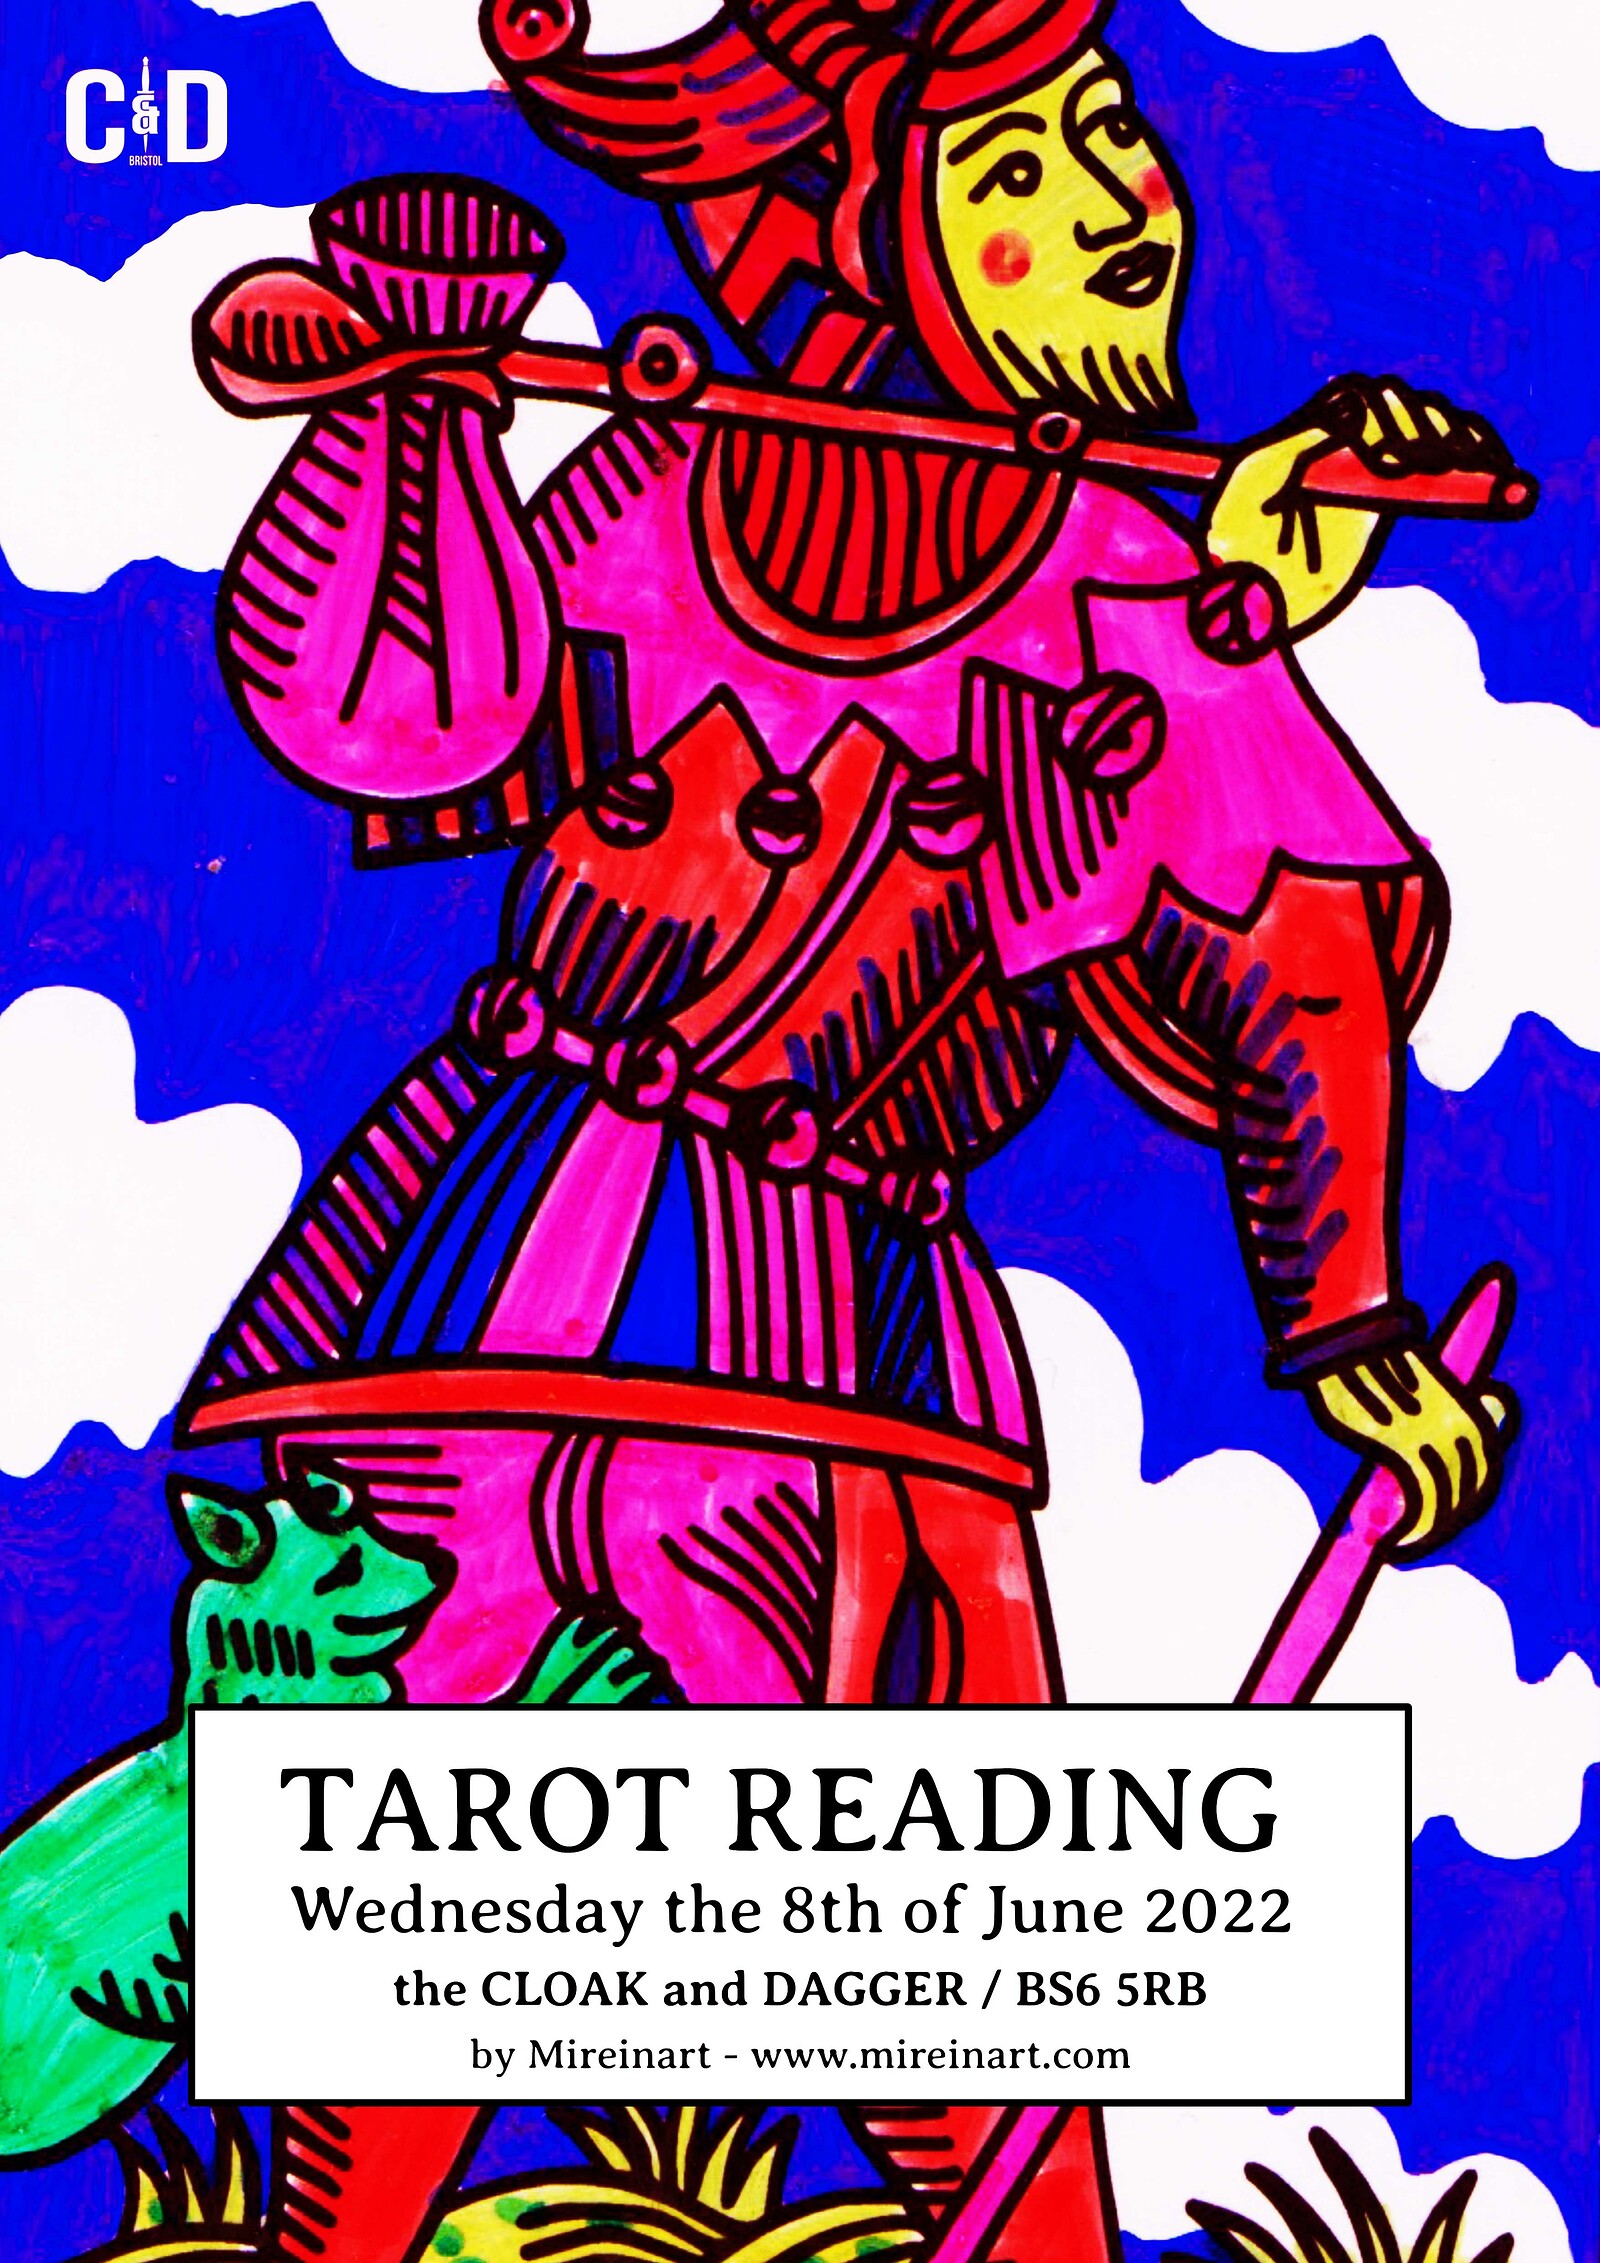 Tarot Reading at The Cloak and Dagger